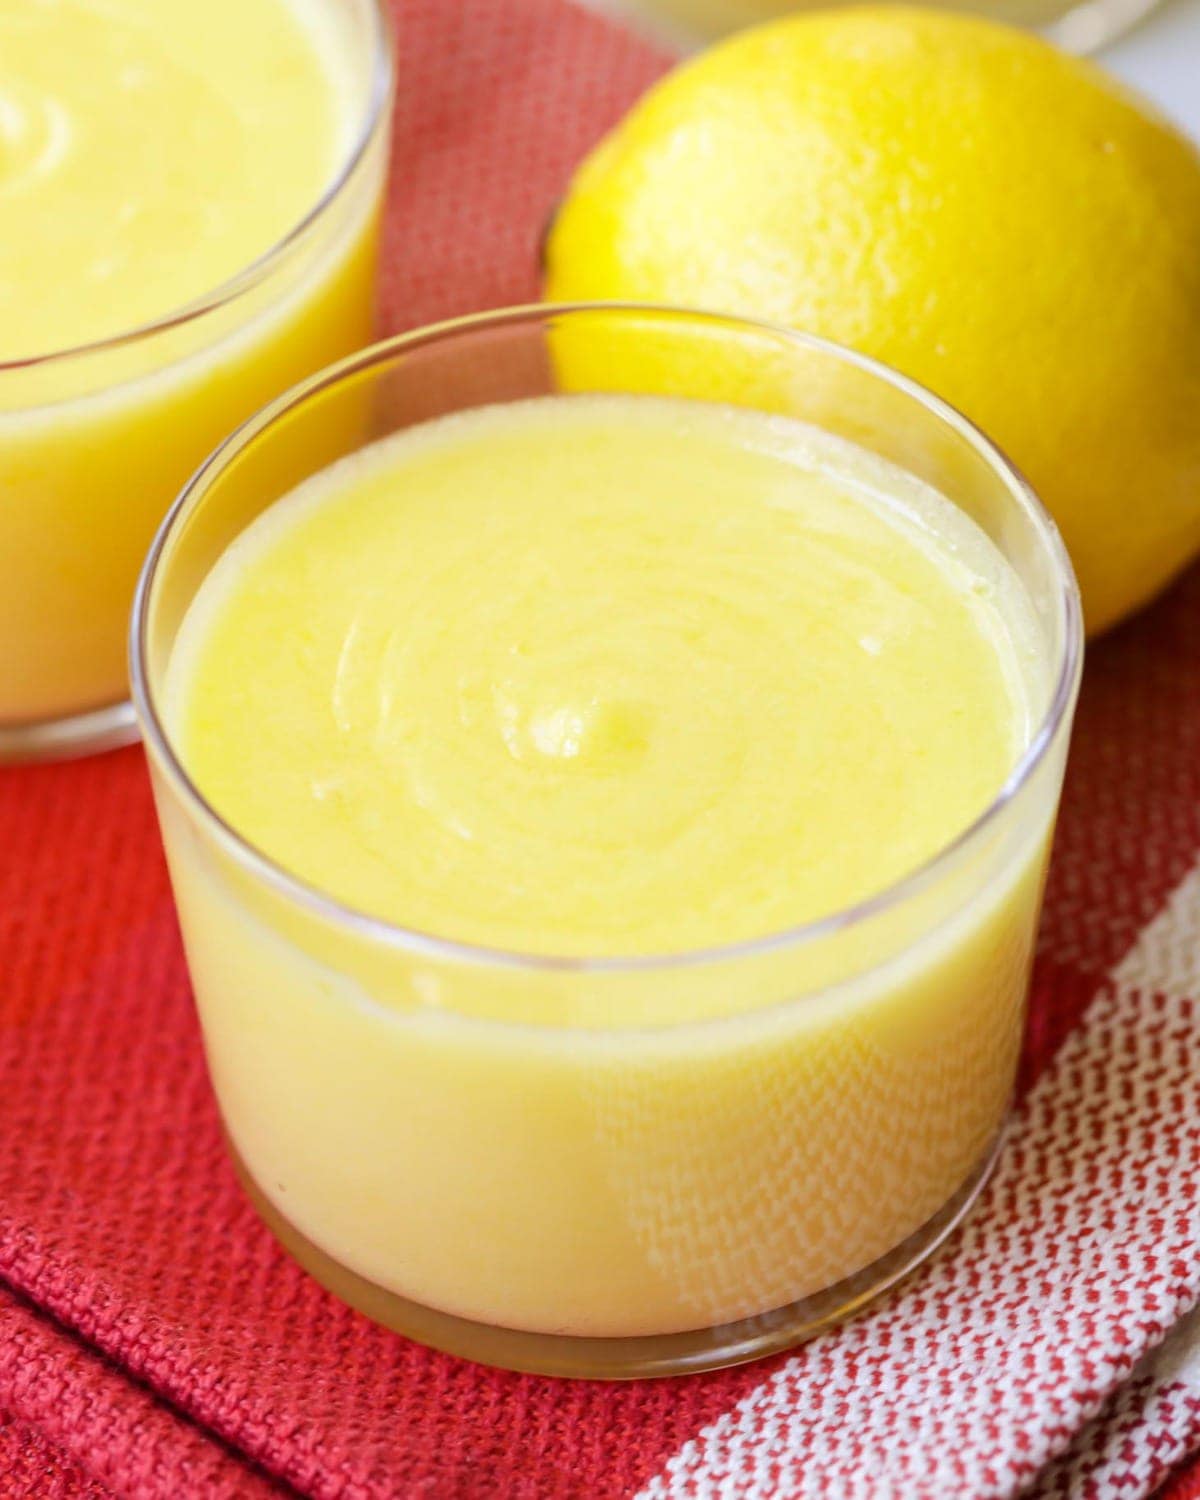 Close up of a glass cup filled with yellow lemon curd